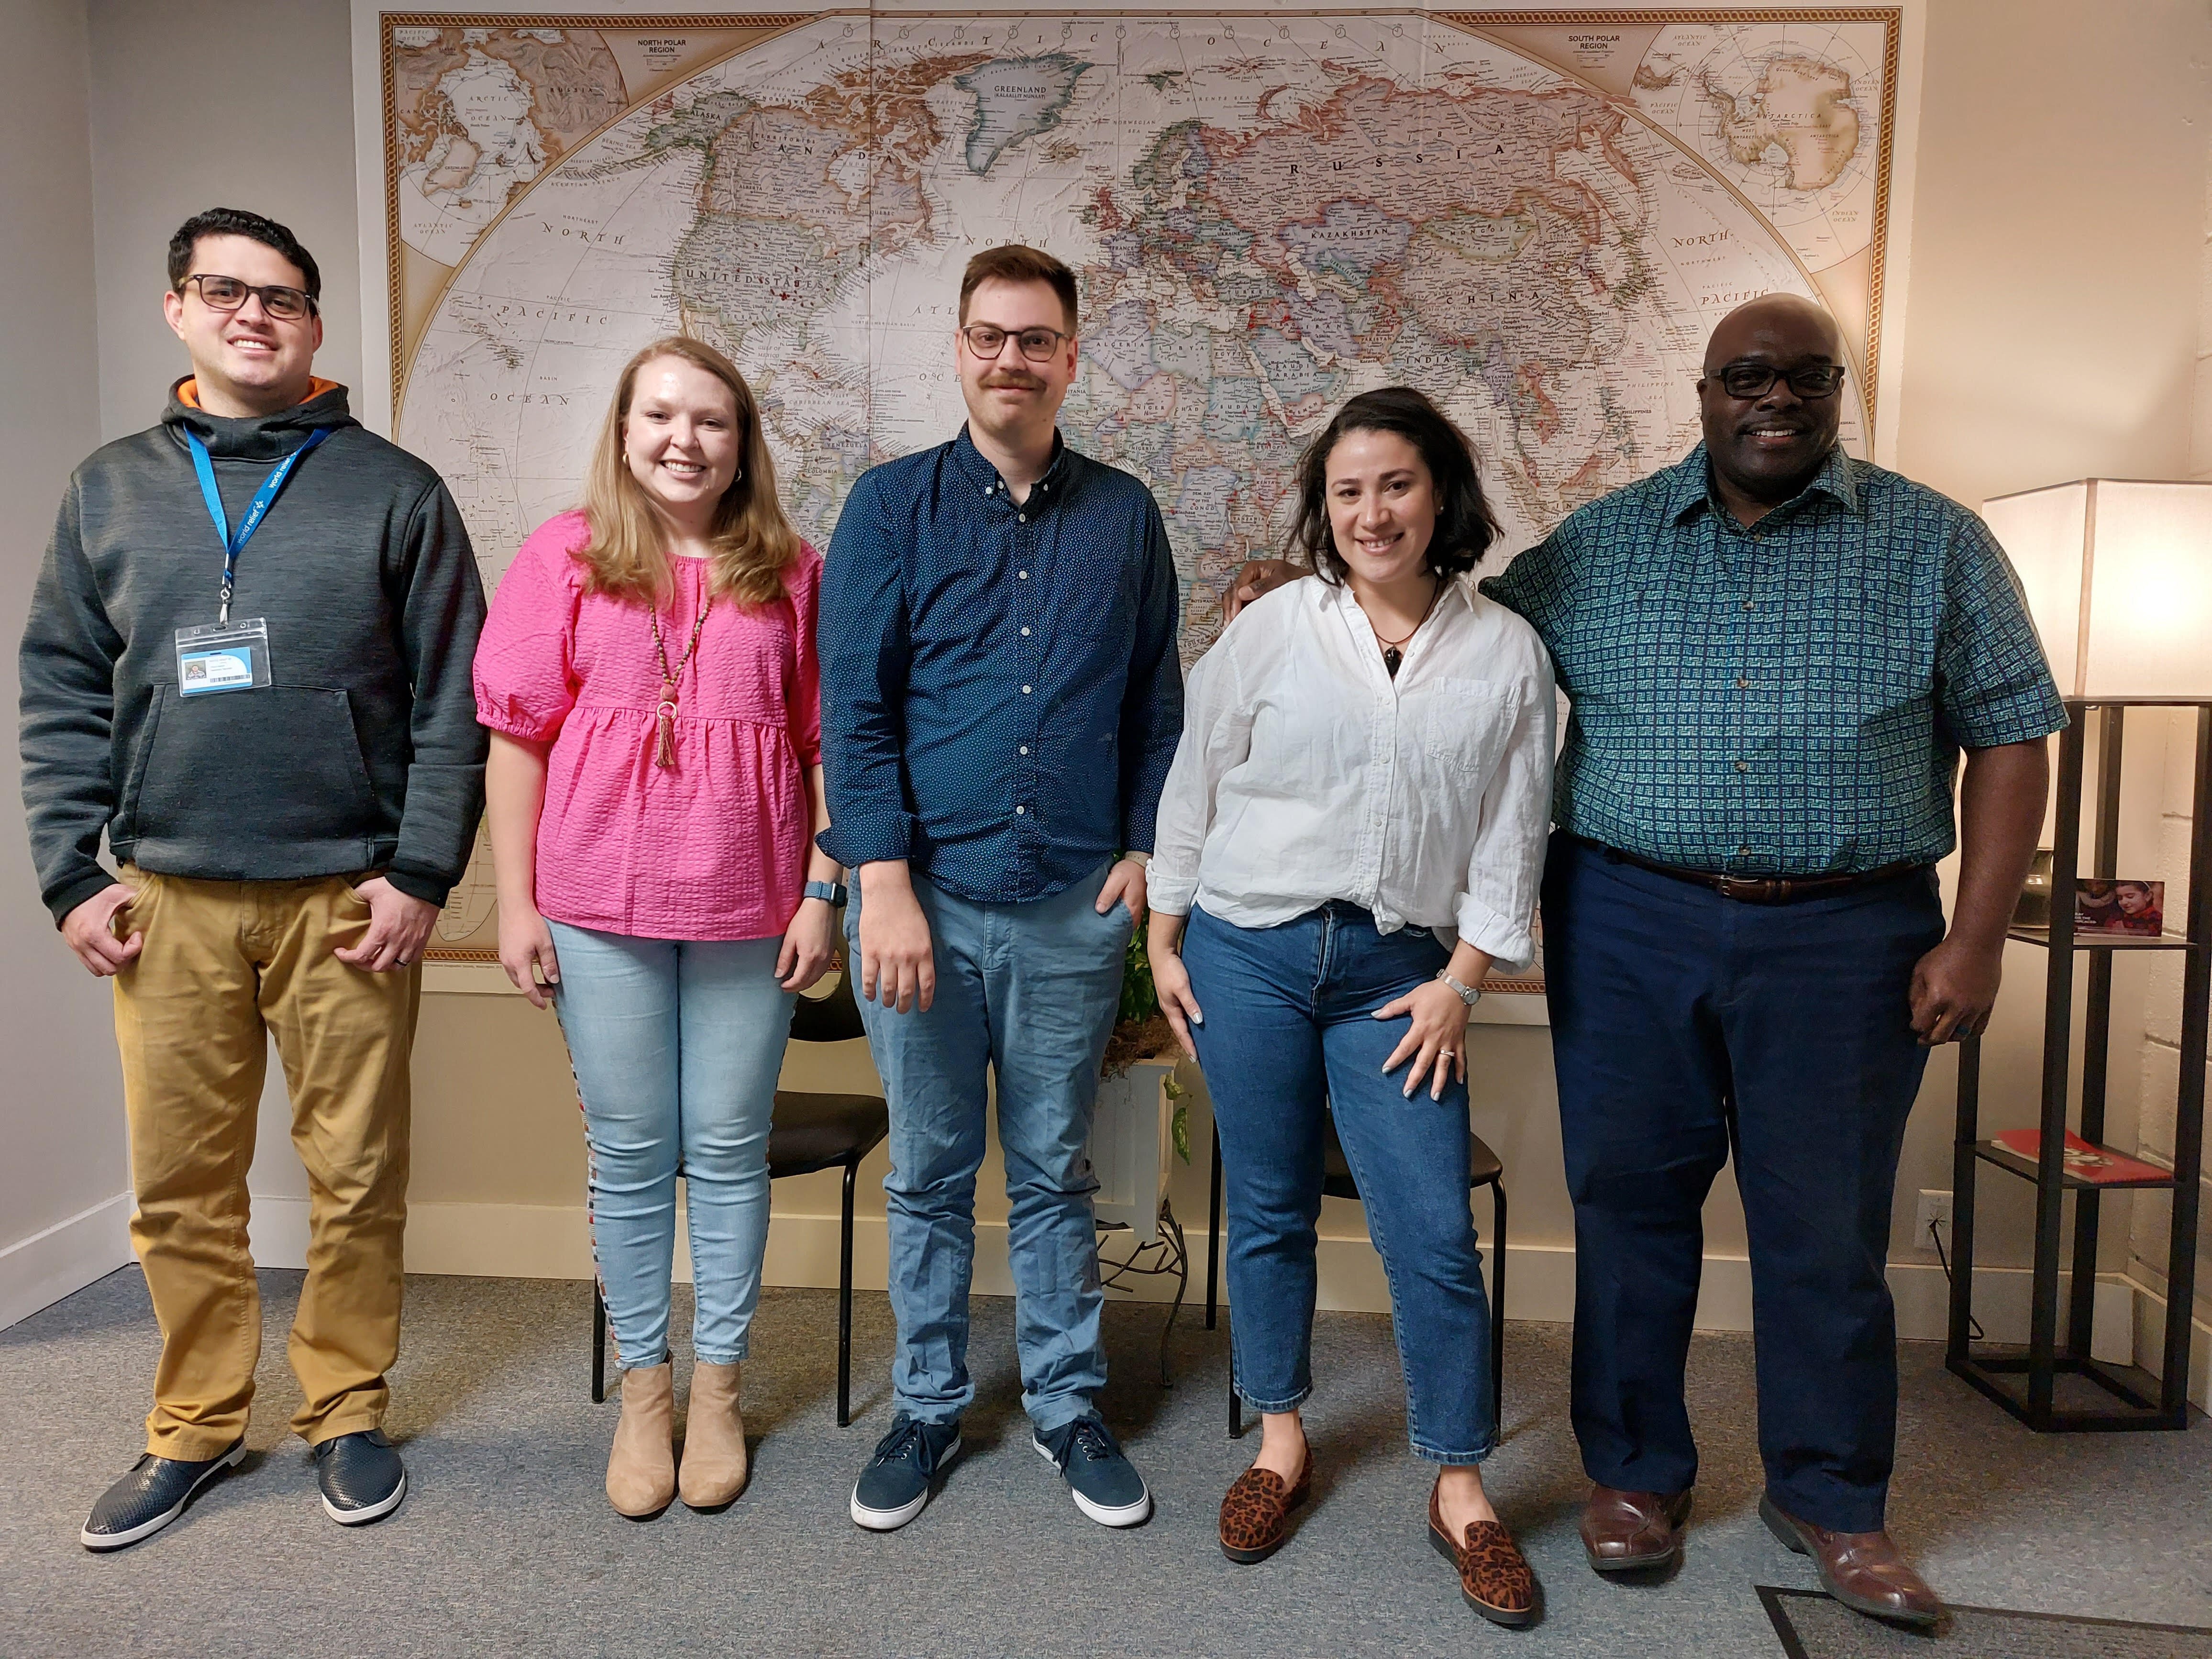 The EMployment and Economic Opportunity team at World Relief Memphis works to resettle refugees in Memphis. L to R: Oscar Herrera, Susannah Bland, Andy Kirk, Skarleth Tyler, Clarence Williams. (submitted)